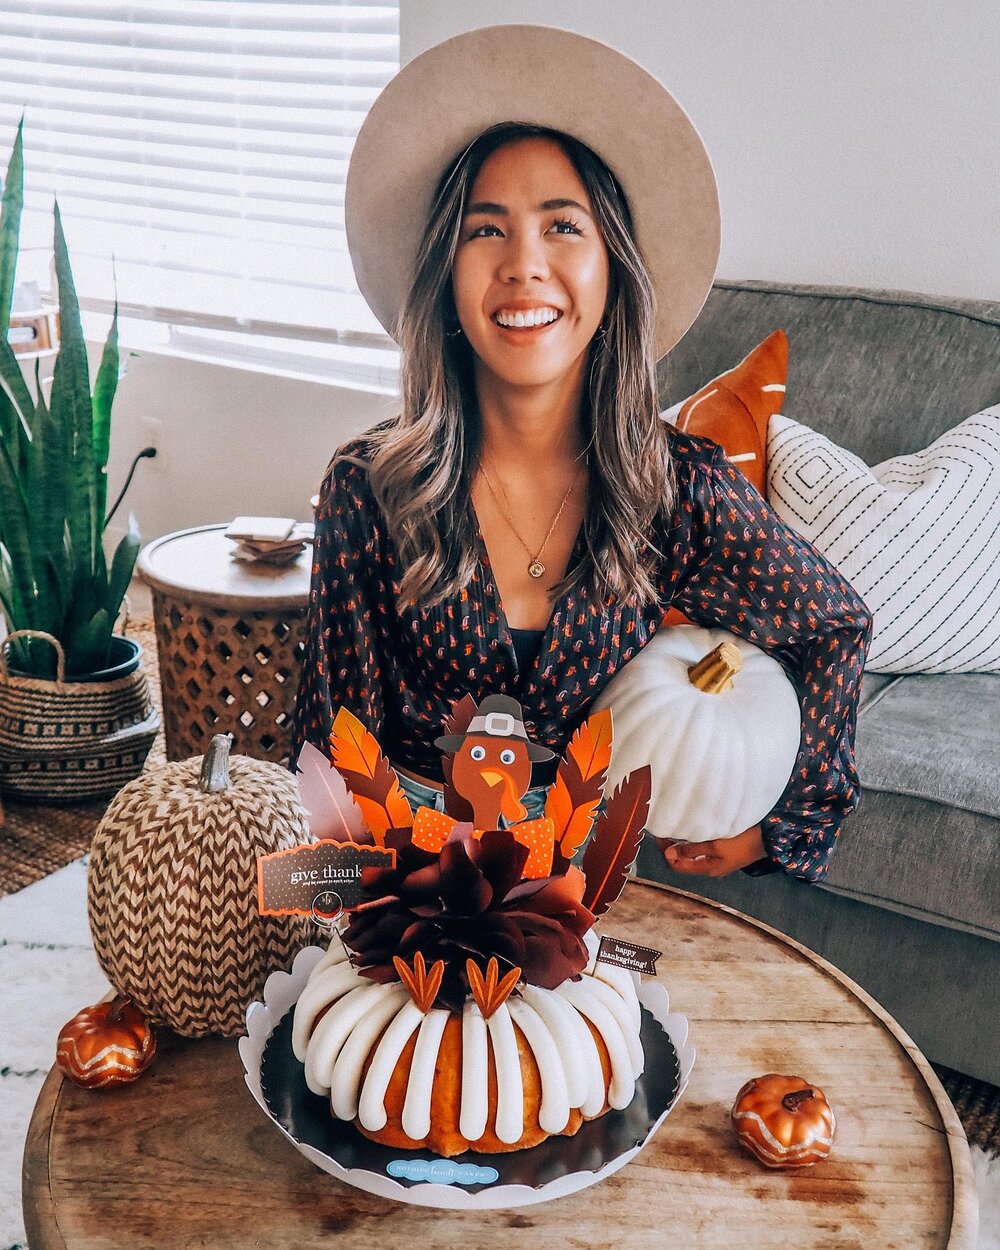 What brings you JOY? ☺️🧡 The NEW &ldquo;Give Thanks&rdquo; Decorated Bundt Cake from
@NothingBundtCakes reminds me of all the things that make life sweet and joyful: my family, my fiance,
my friends, my dog, and my new house! Plus, I love how it inc